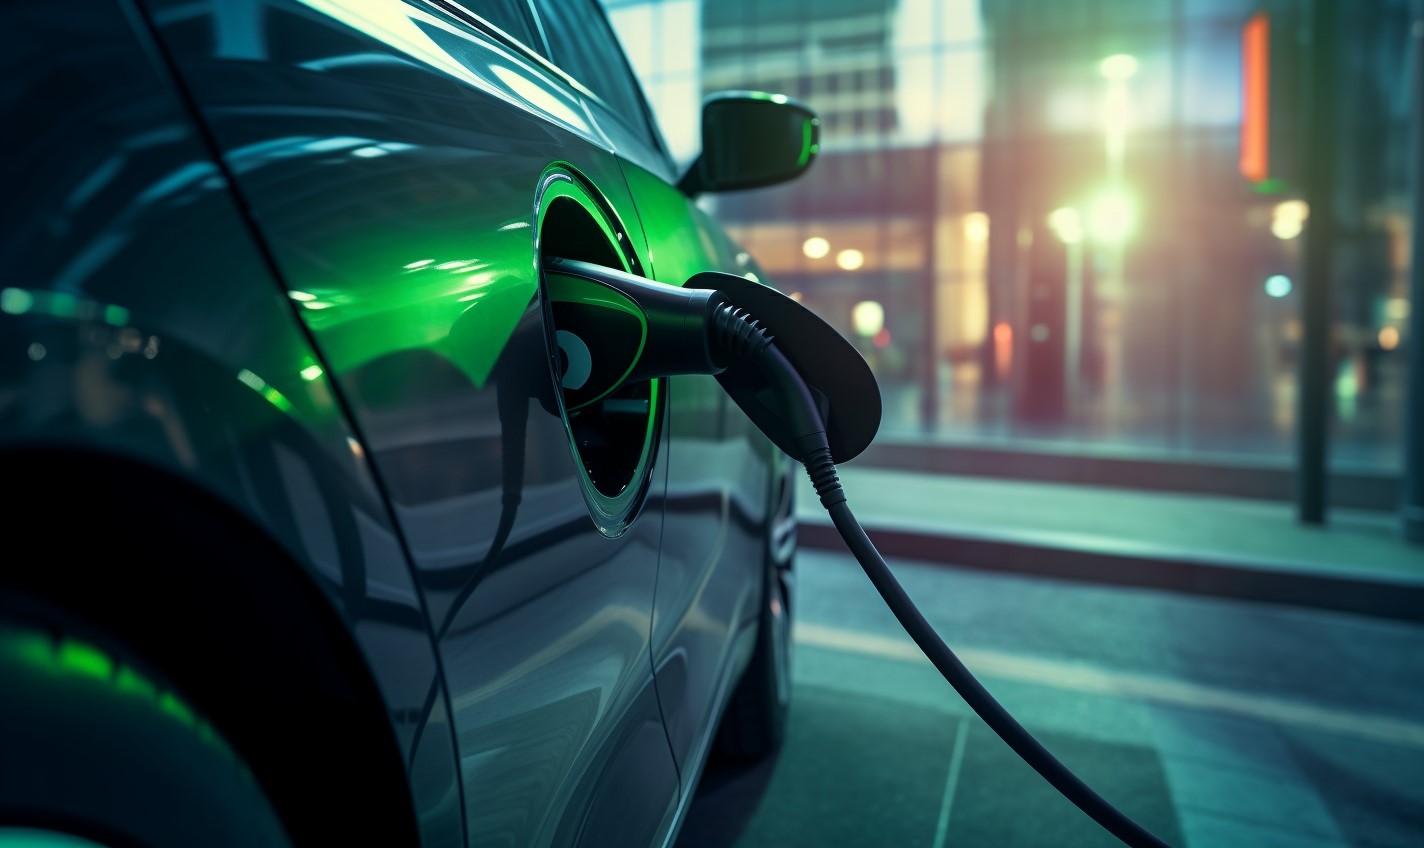 Need to Find an Electric Vehicle Charging Station? Try These Tips